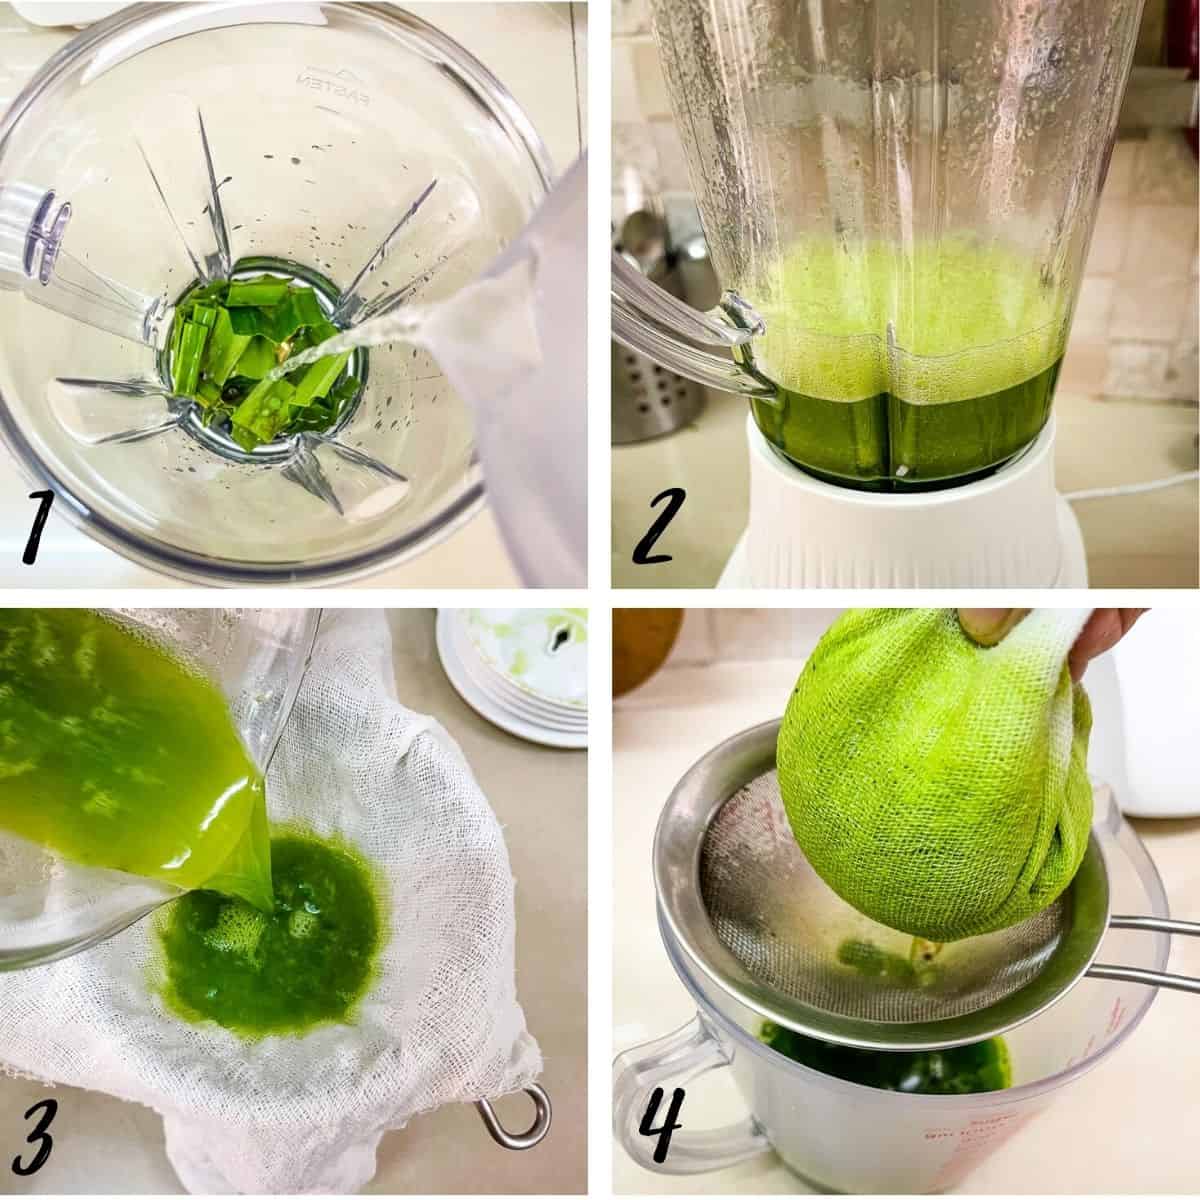 A poster of 4 images showing how to make pandan juice.